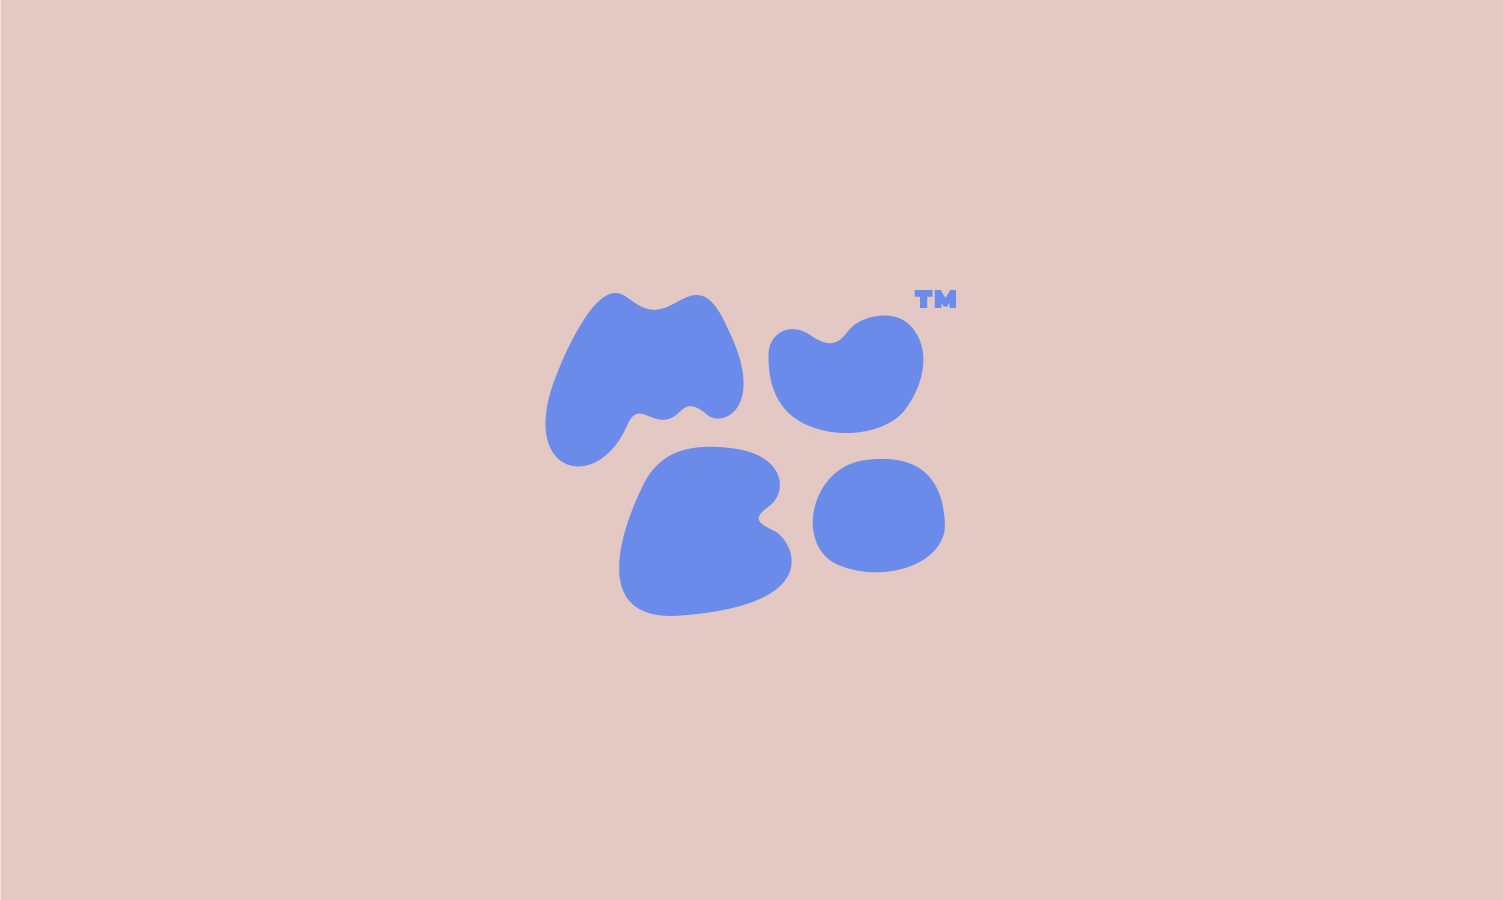 Abstract blue paw print logo with a trademark symbol on a pastel pink background, created by a leading Design Agency UK.